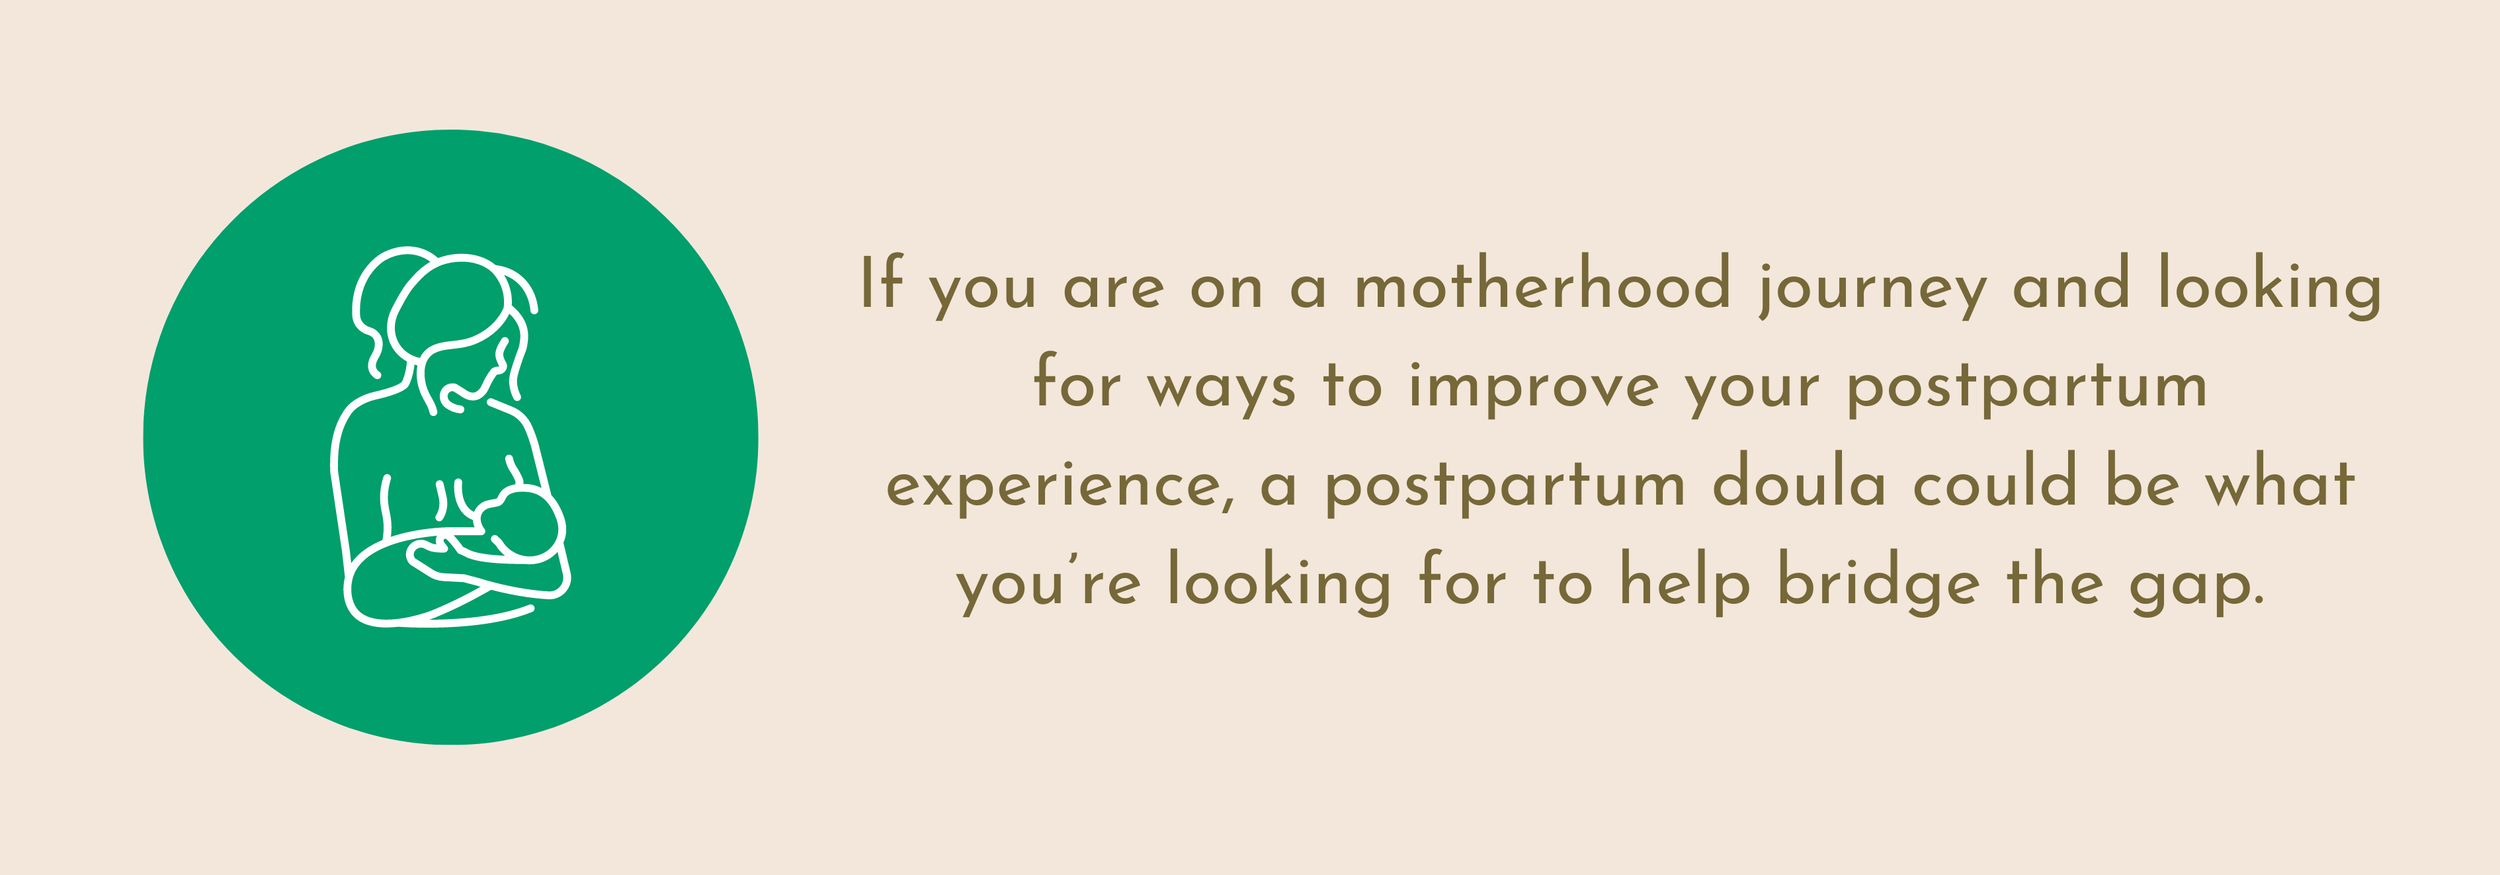 Why Is Postpartum Care Important? — Newborn Mothers